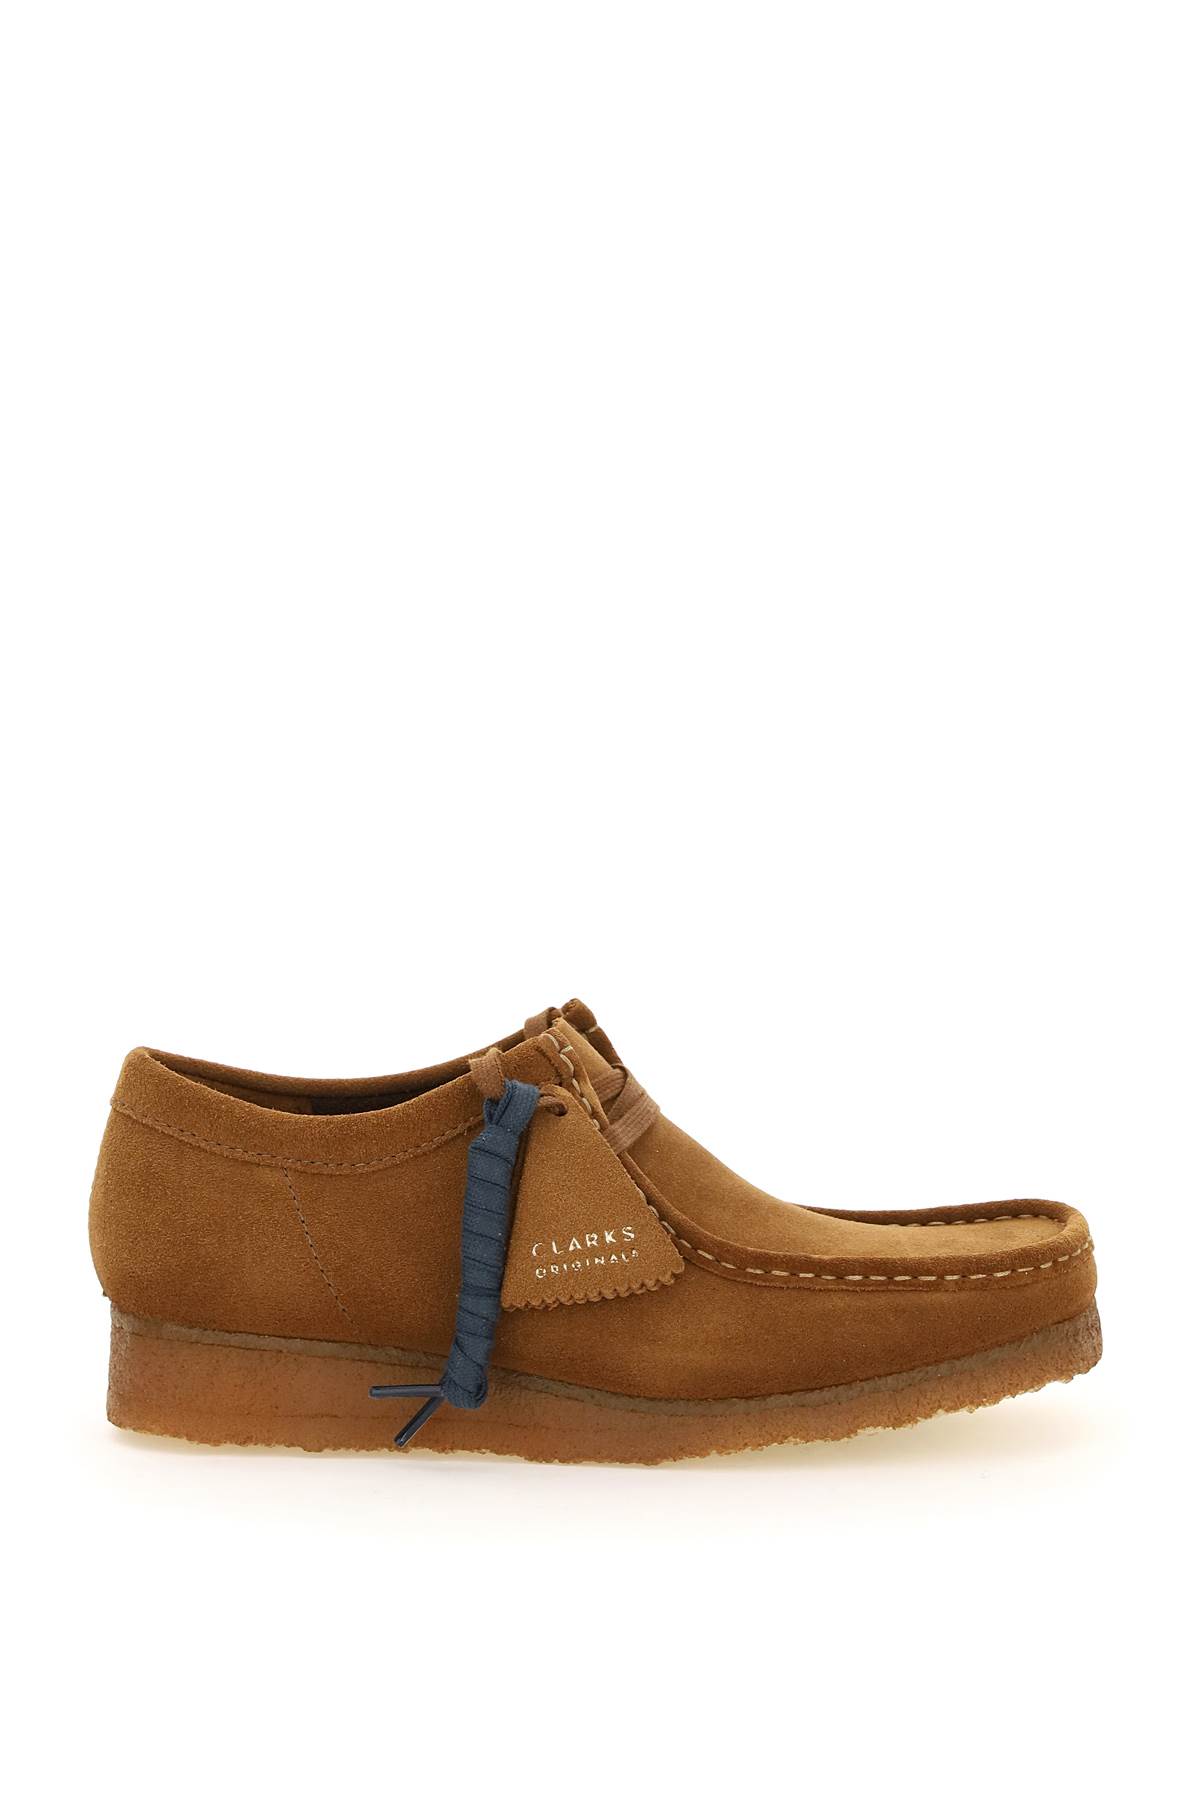 Clarks Wallabee Suede Leather Lace-up Shoes